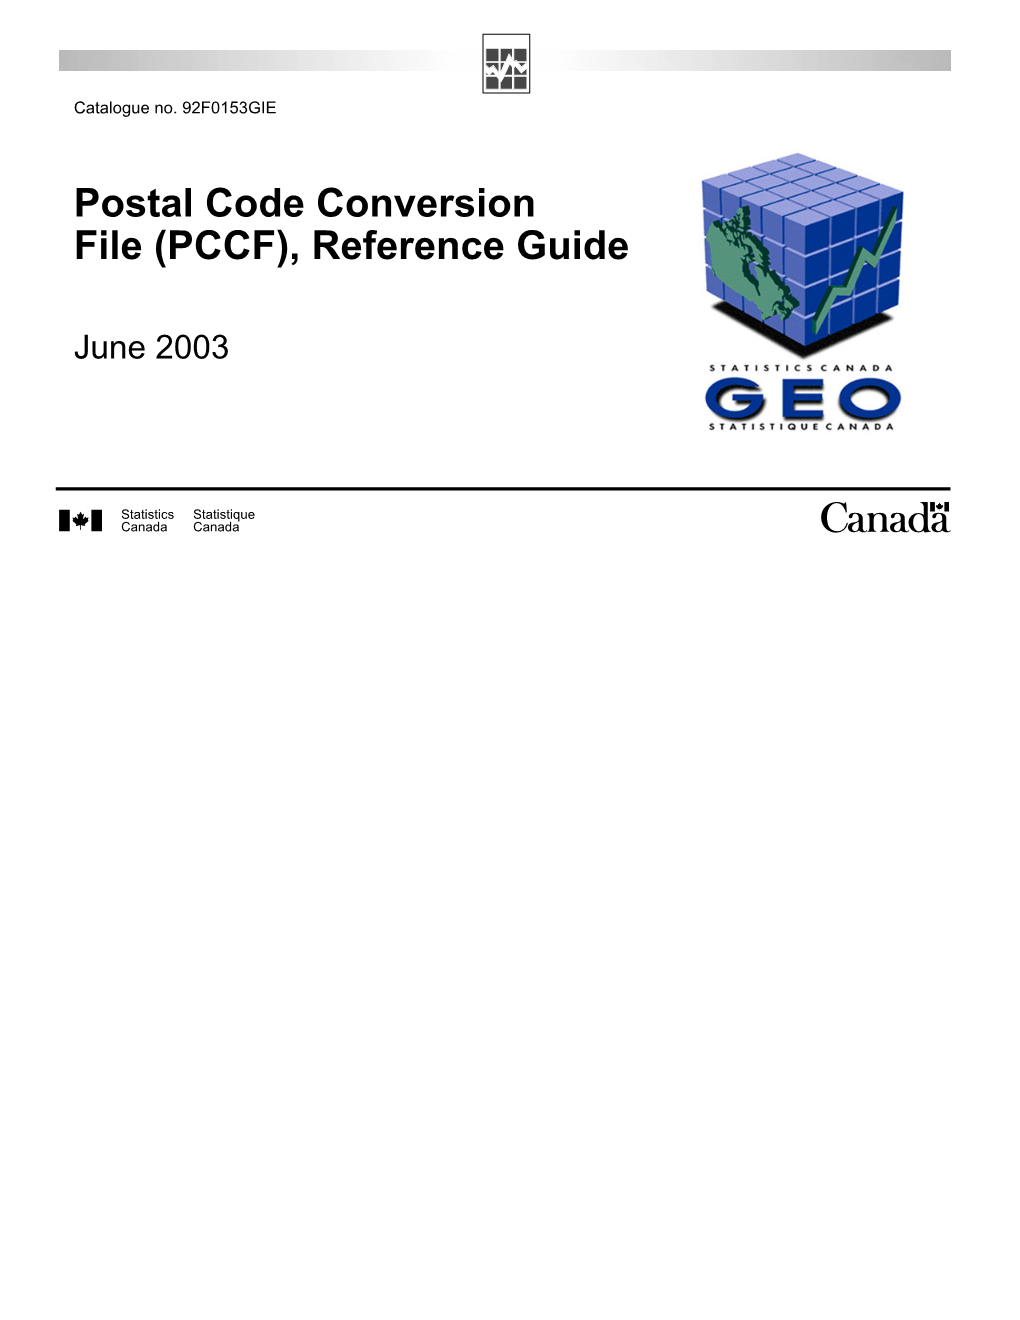 Postal Code Conversion File (PCCF), Reference Guide